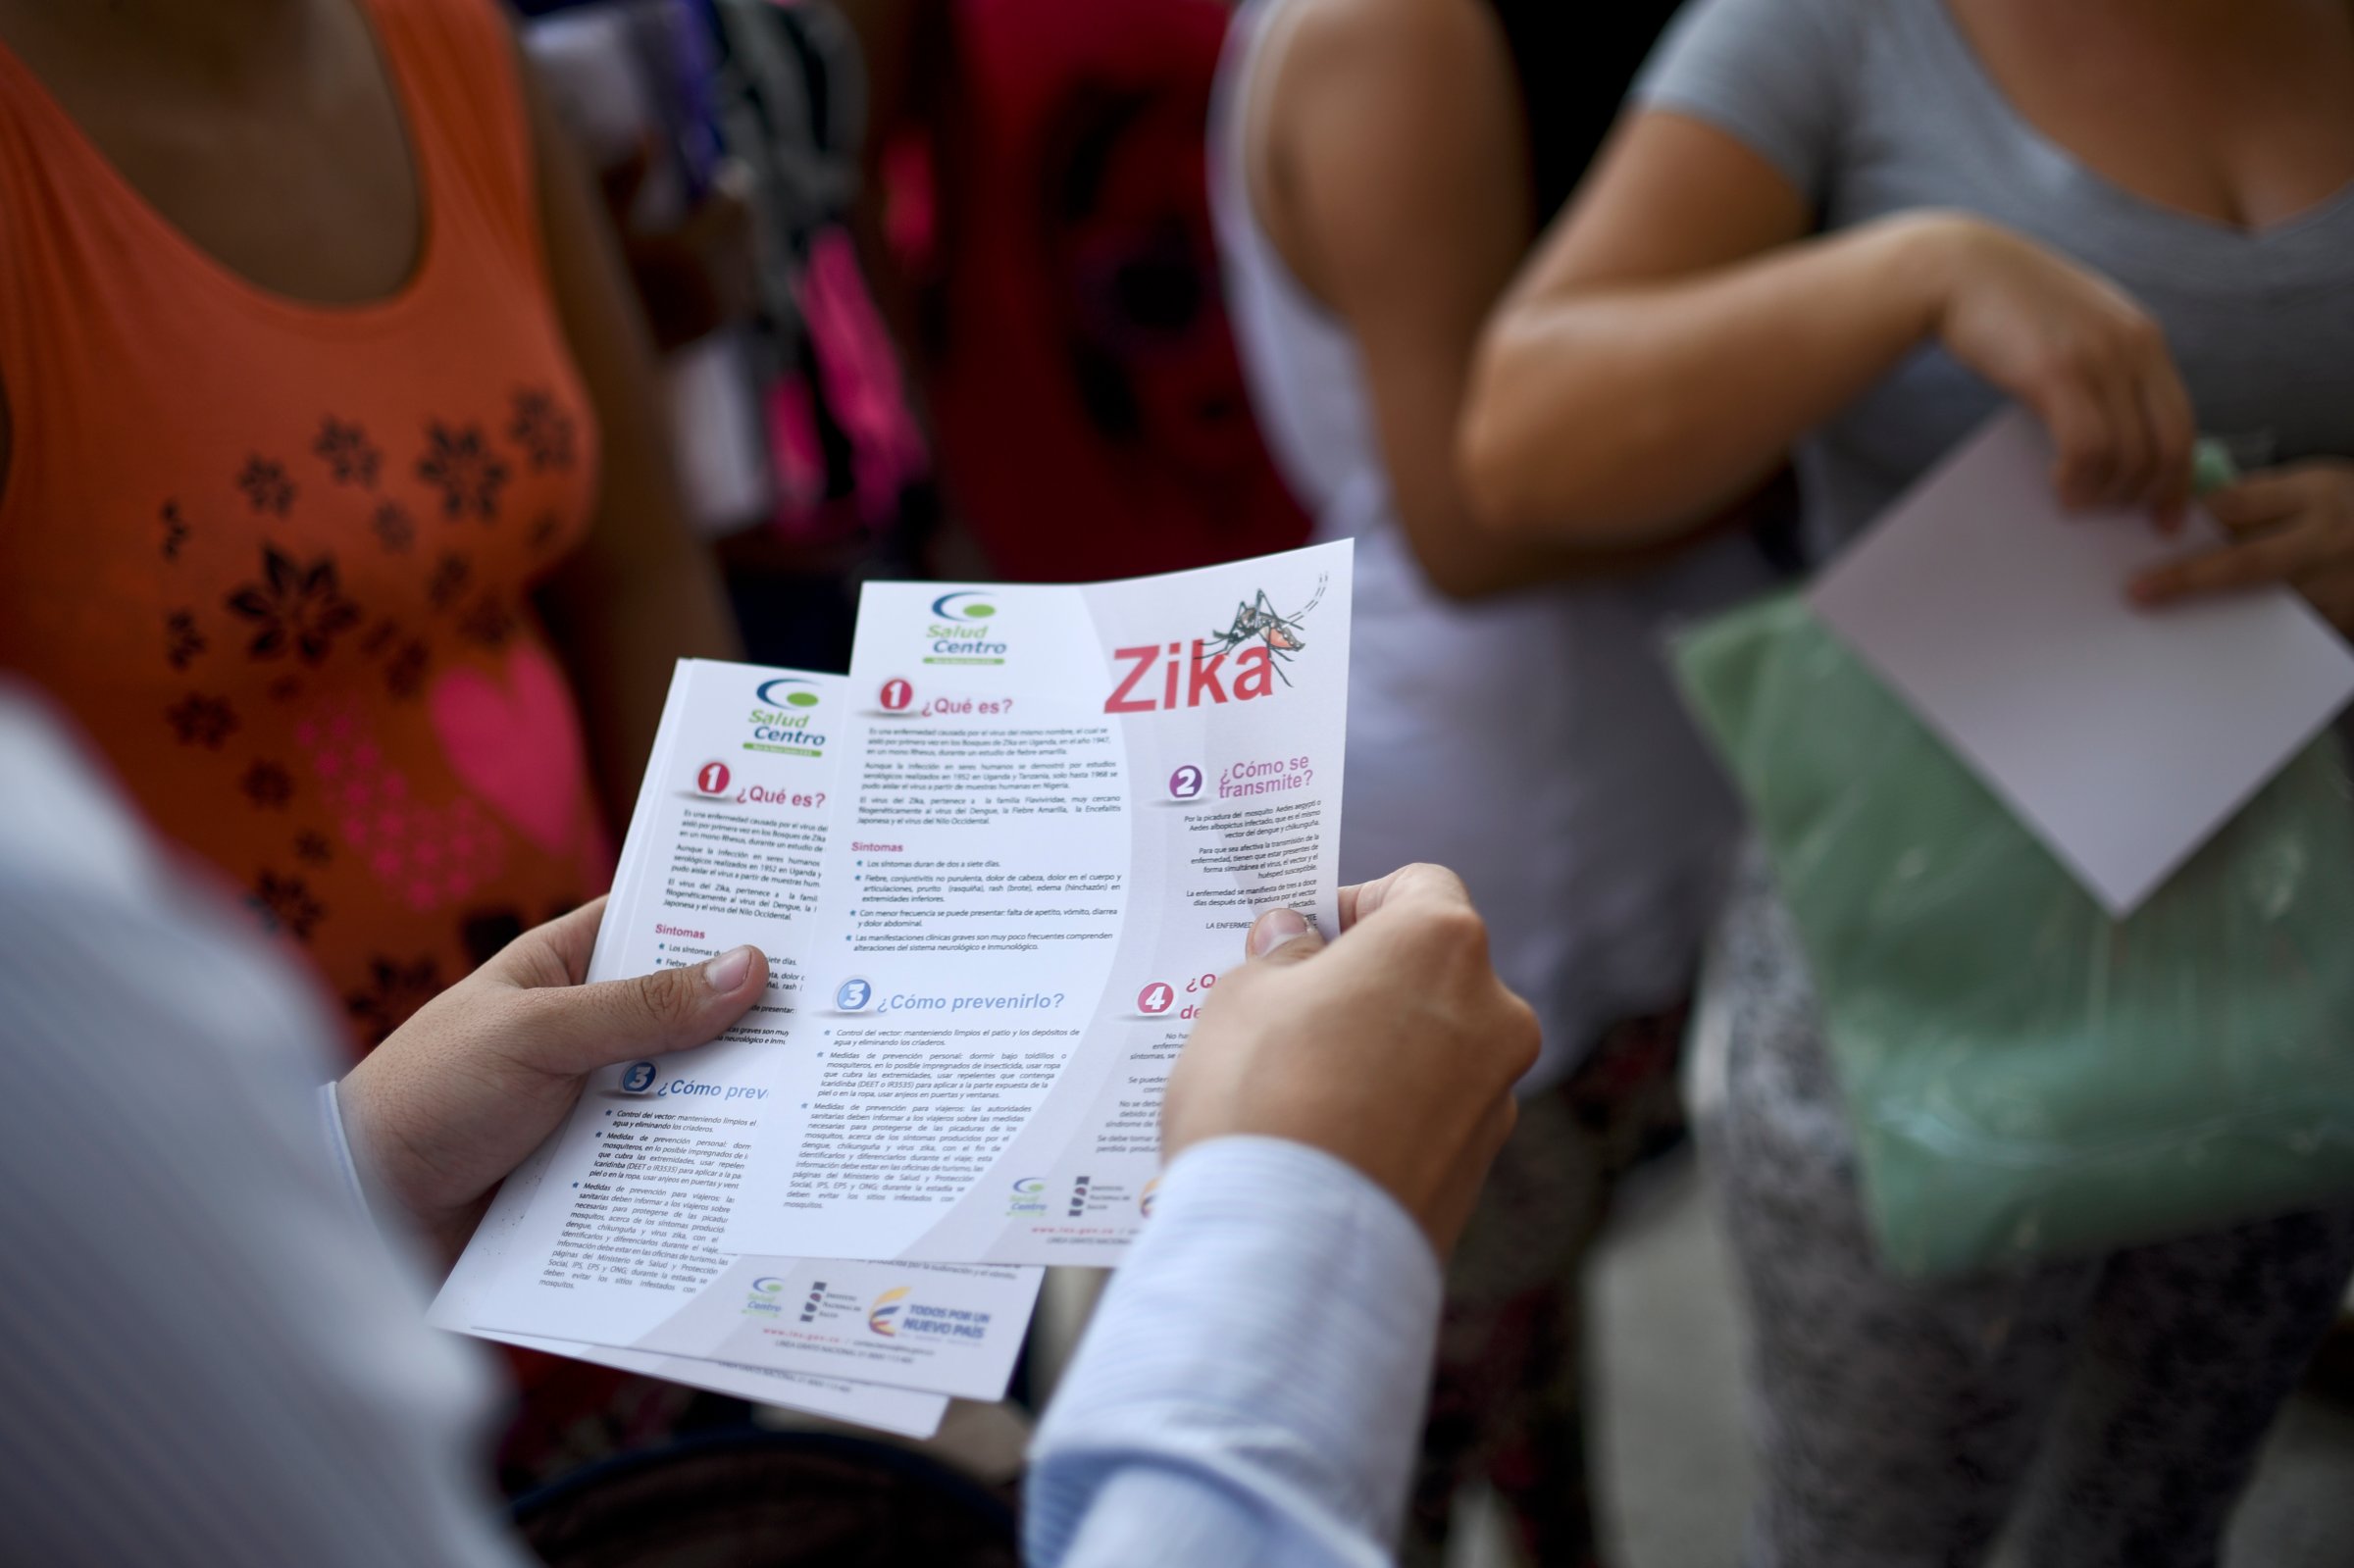 An official of the of Health Ministry delivers brochures with information about the Zika virus to pregnant women, on Feb. 10, 2016, in Cali, Colombia.